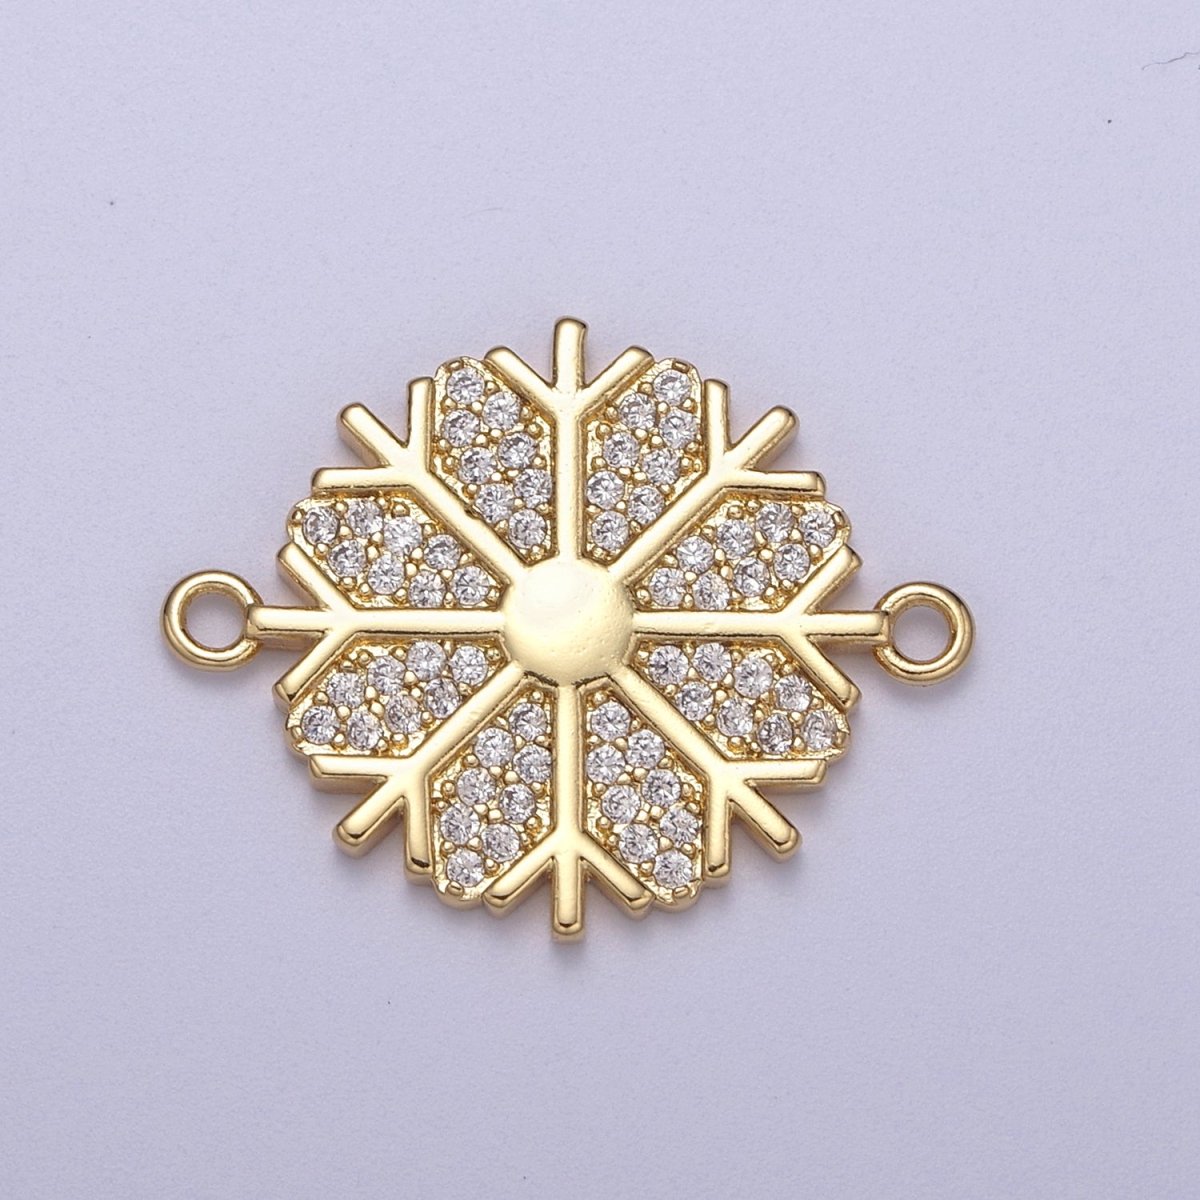 Dainty Gold Filled Snow Charm Connector Cz Snow Flake Link Connector for Bracelet Earring Necklace F-126 - DLUXCA